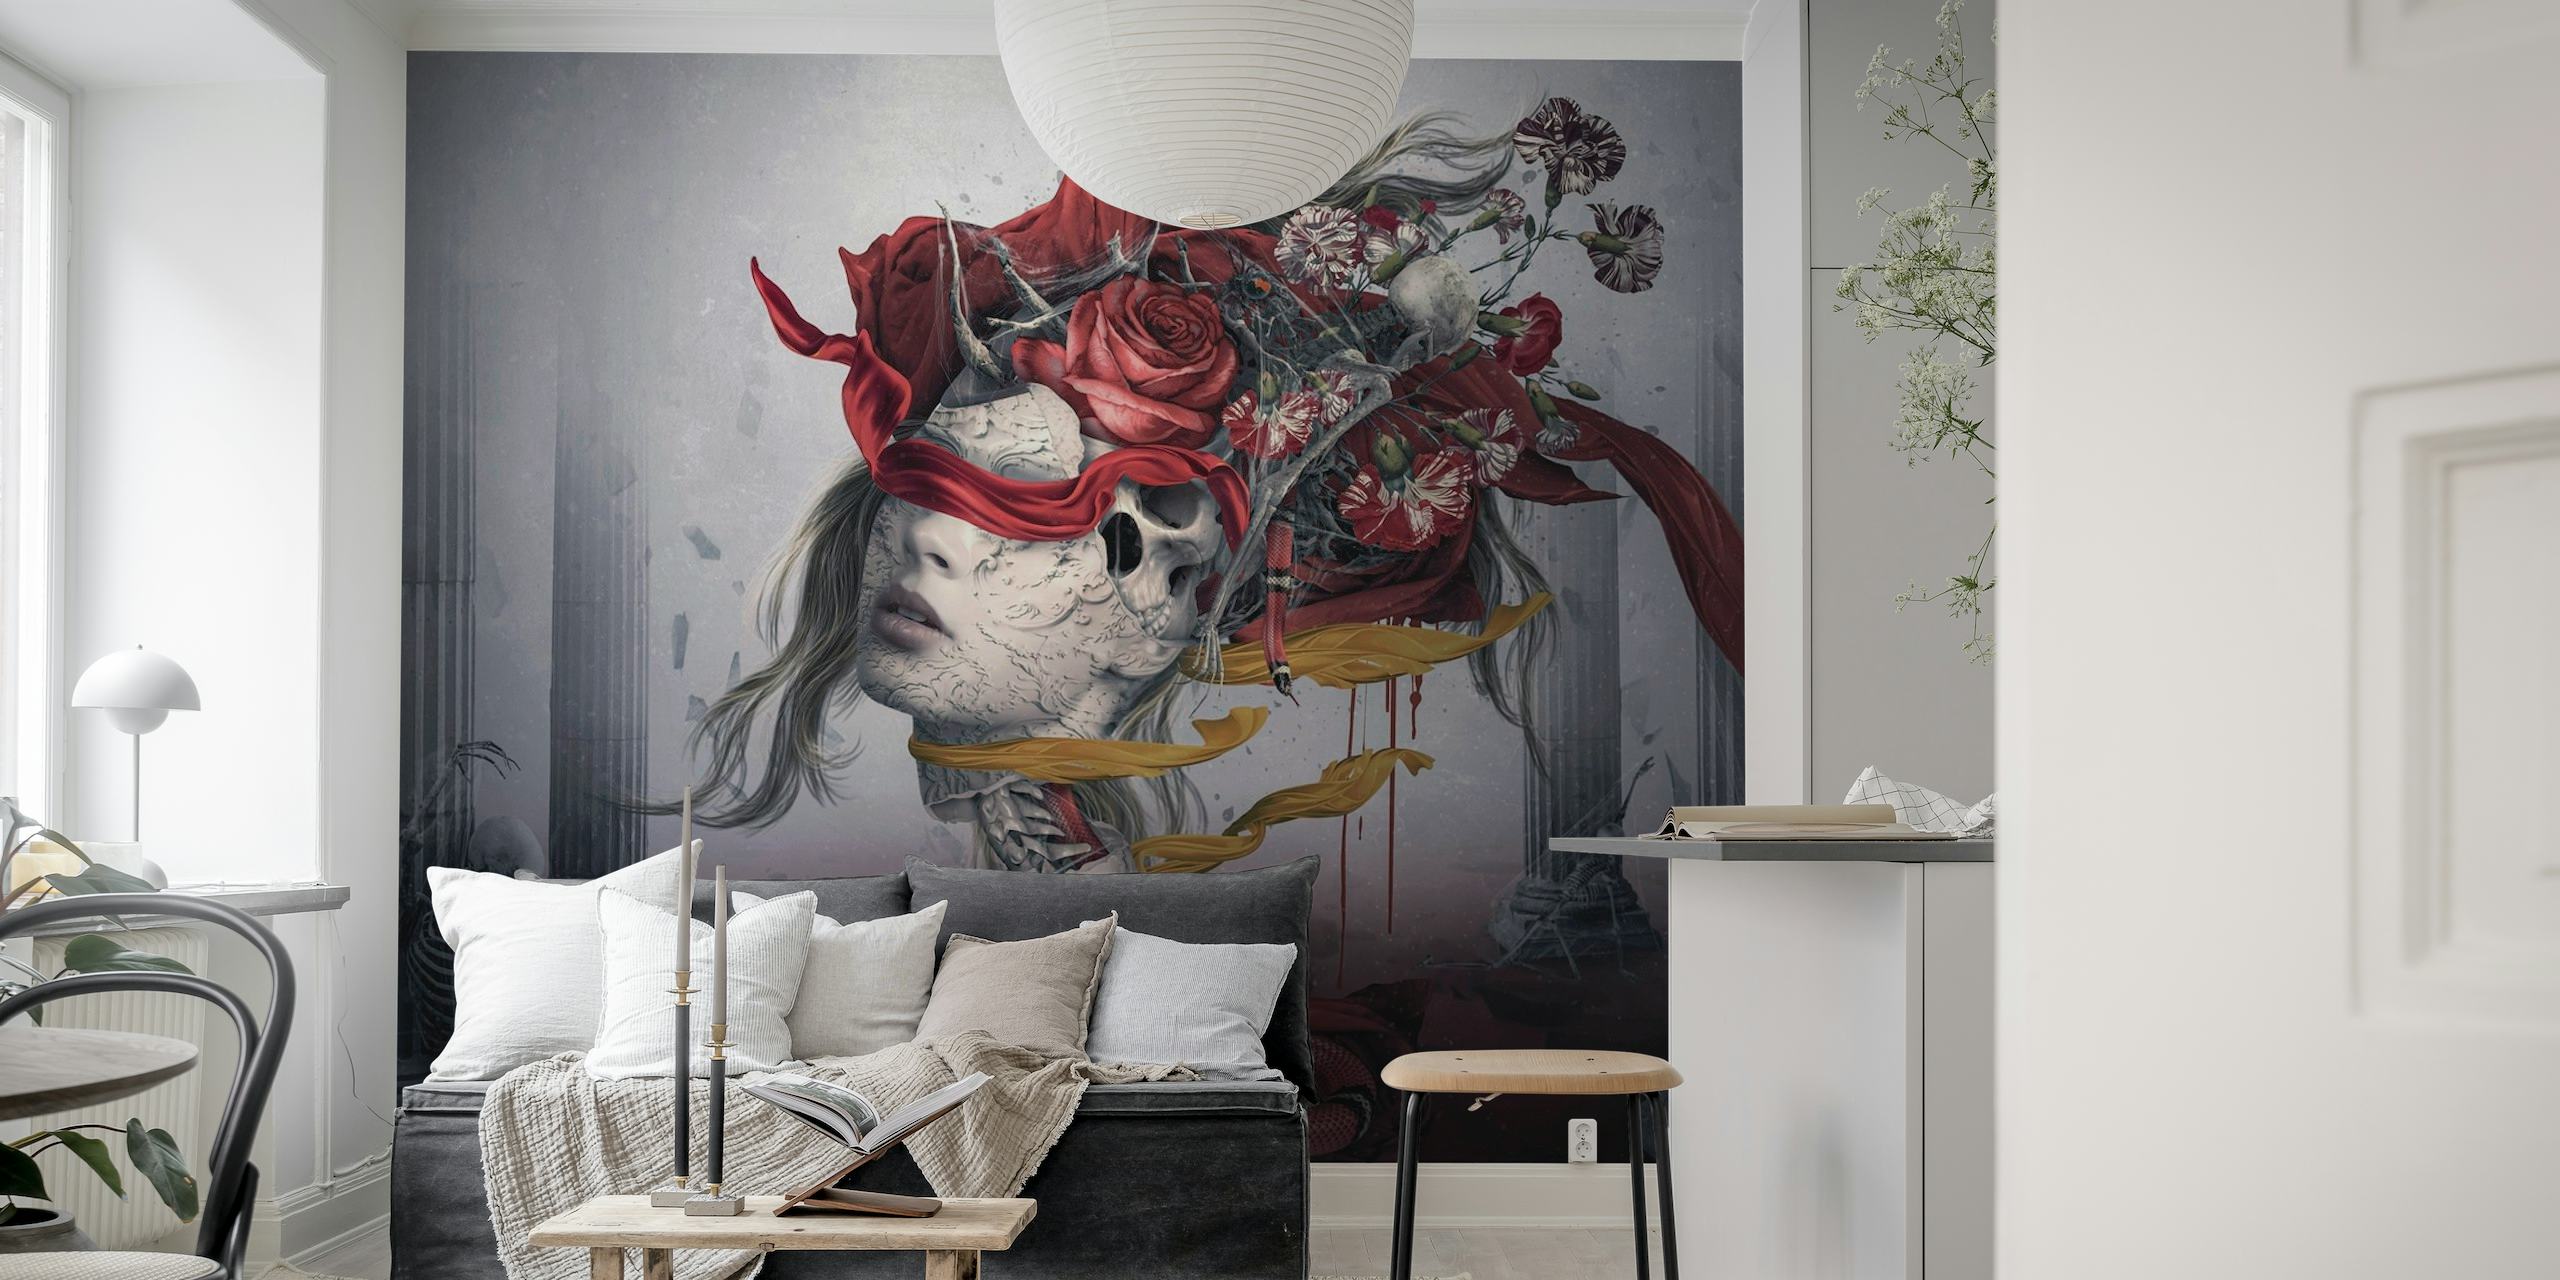 Surreal wall mural depiction of a figure with red roses and smoky details on a muted background